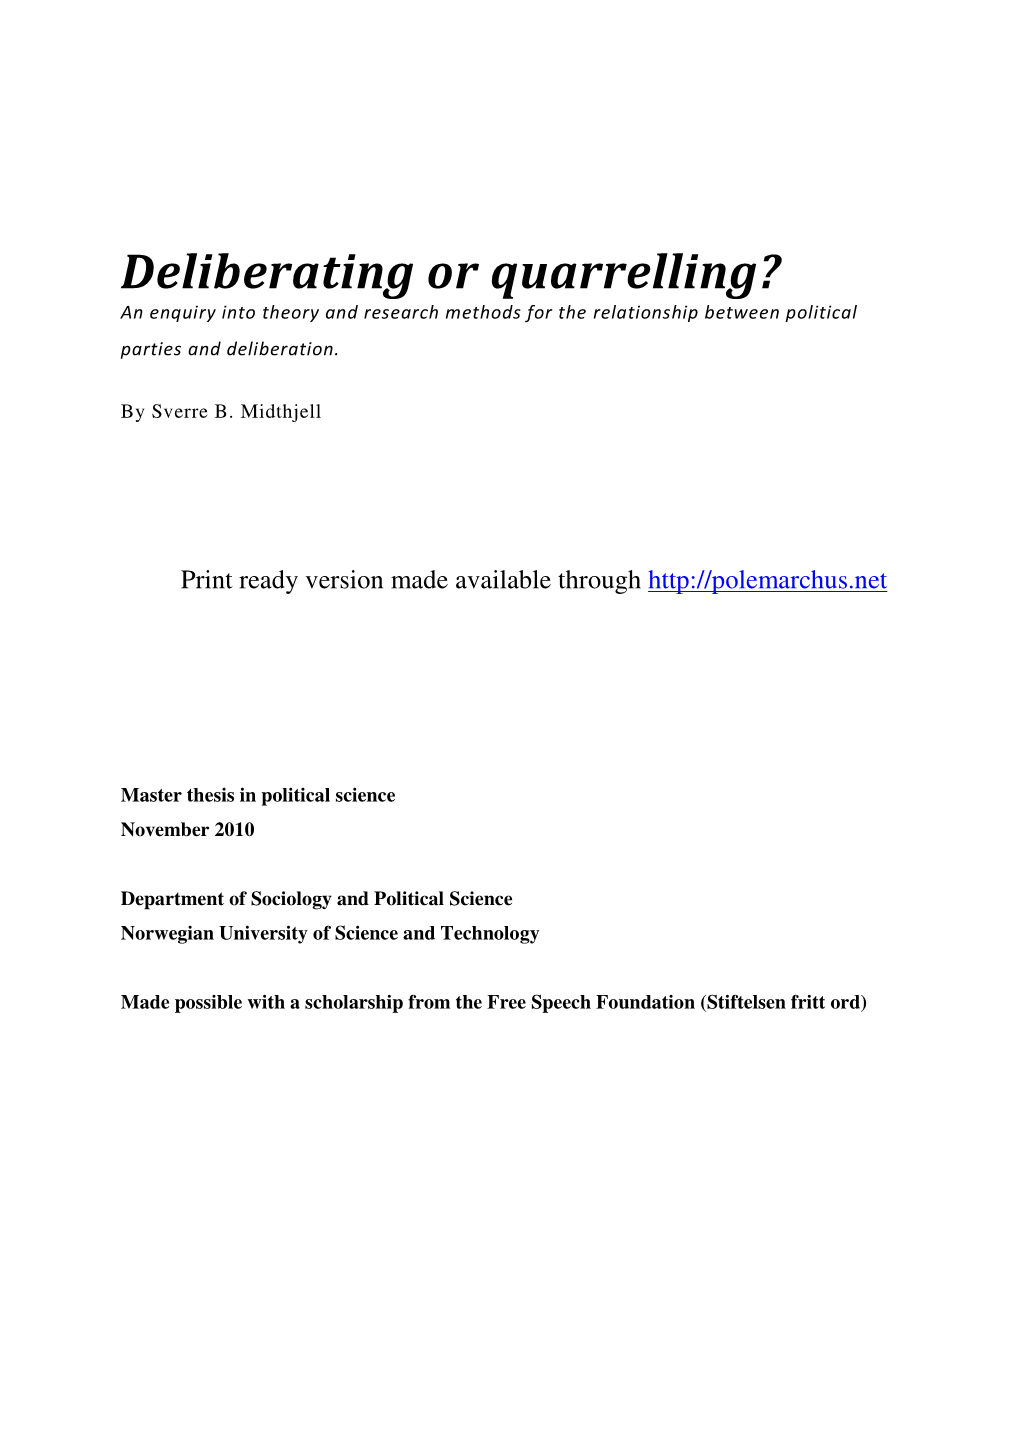 Deliberating Or Quarrelling? an Enquiry Into Theory and Research Methods for the Relationship Between Political Parties and Deliberation